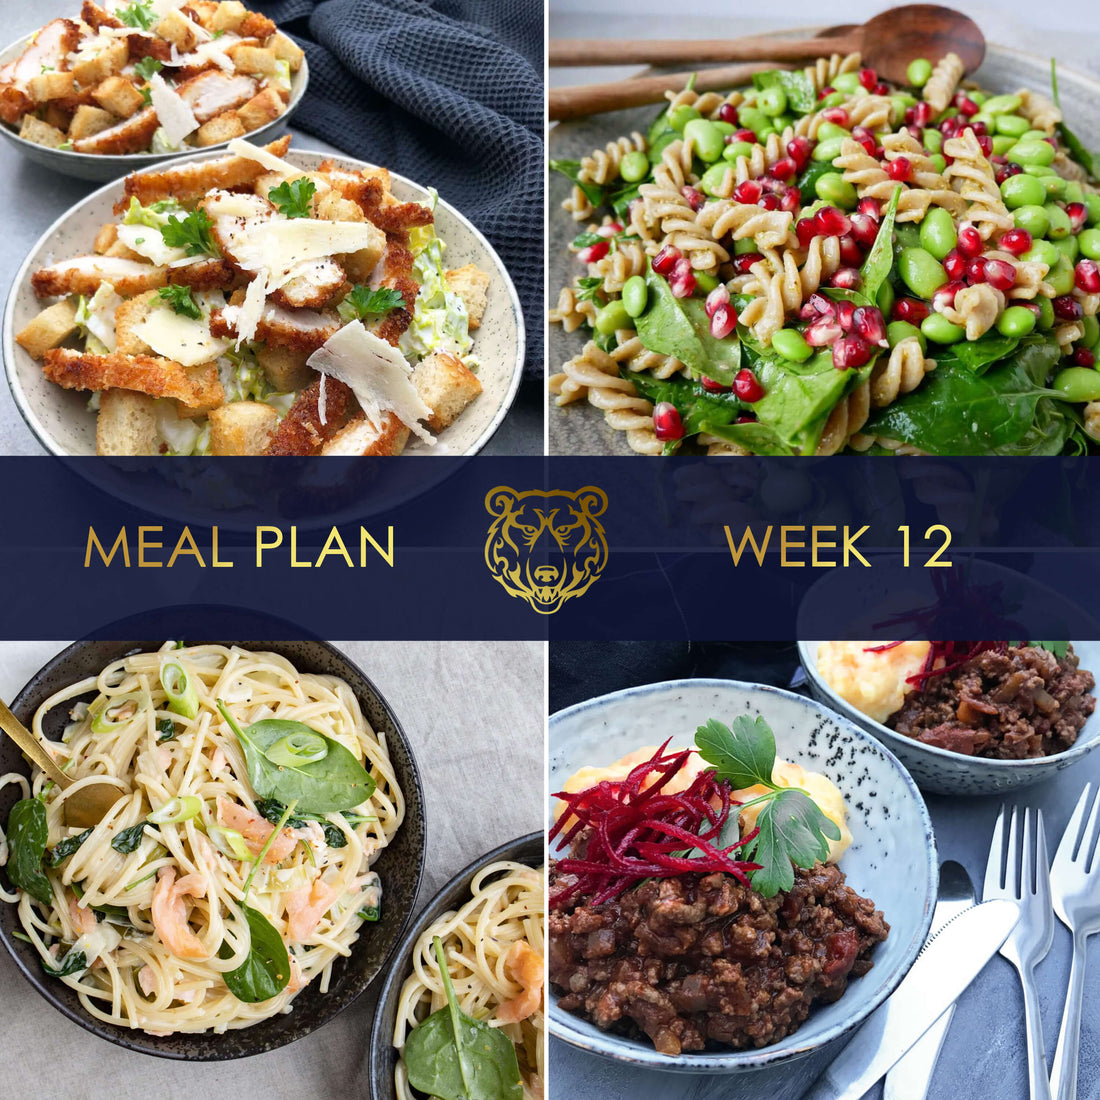 Save time and money on dinners with KUMA meal plan and grocery list. Easy meal prep recipes!